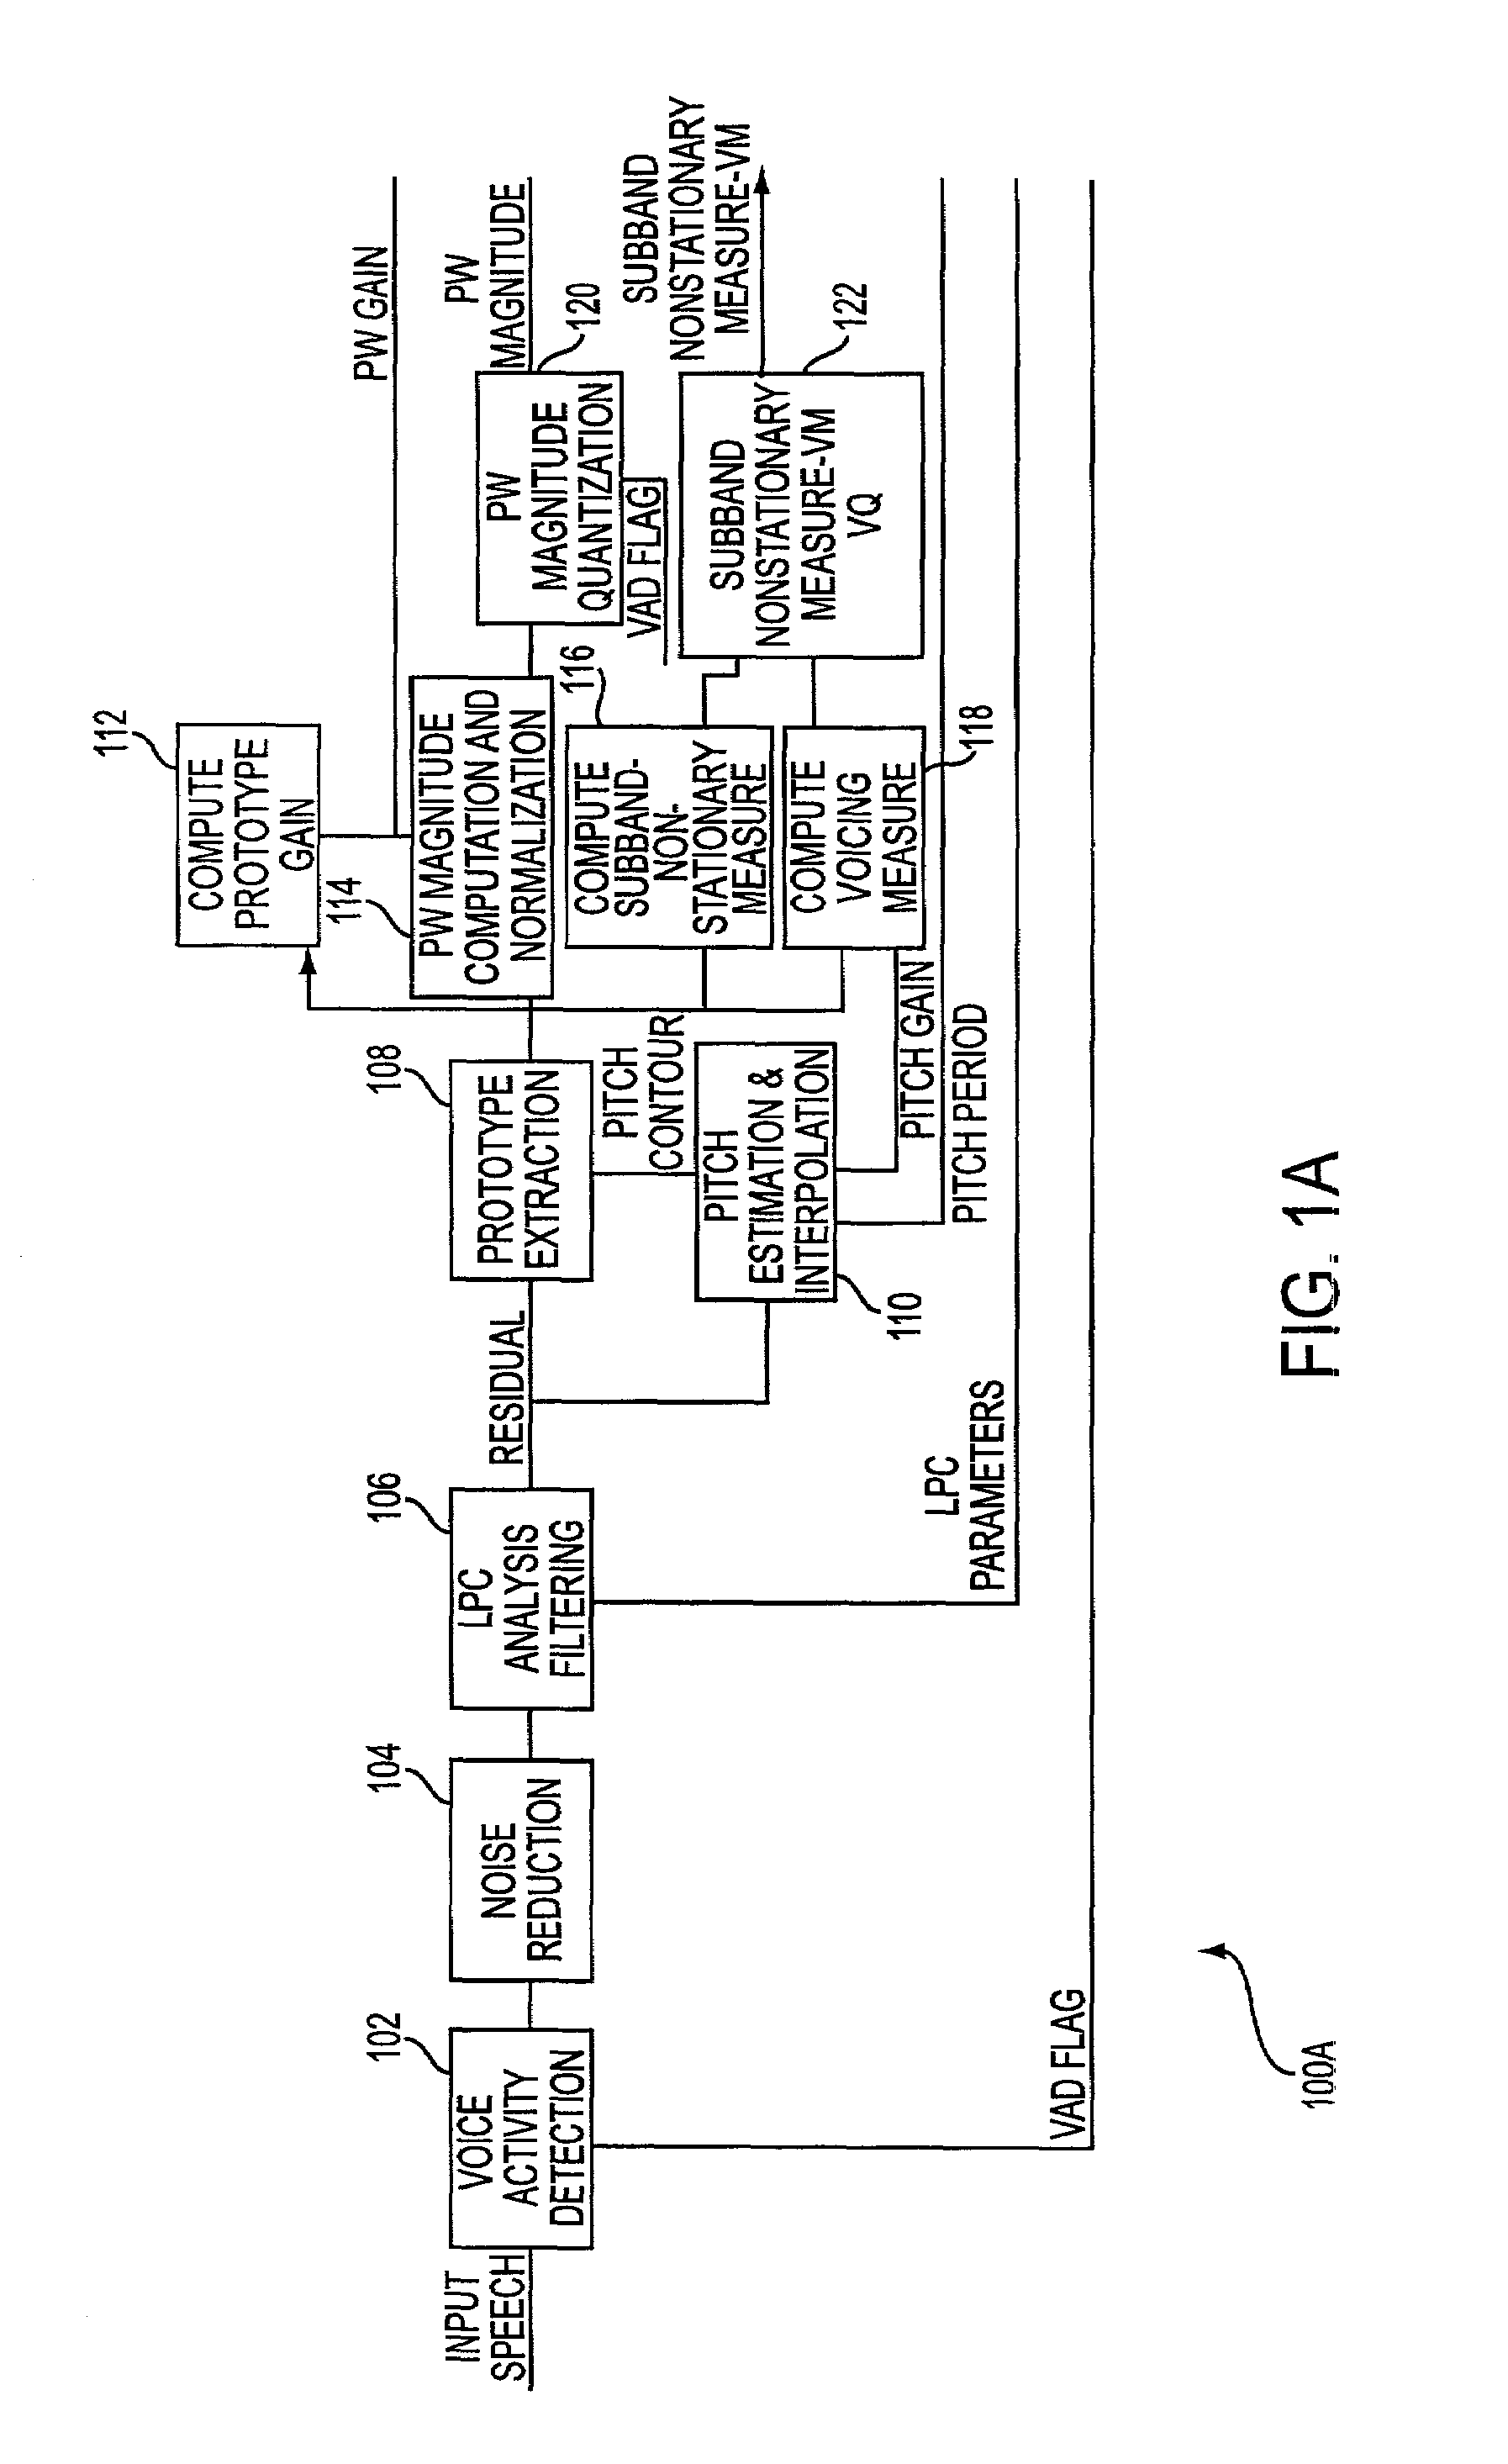 Voicing measure for a speech CODEC system